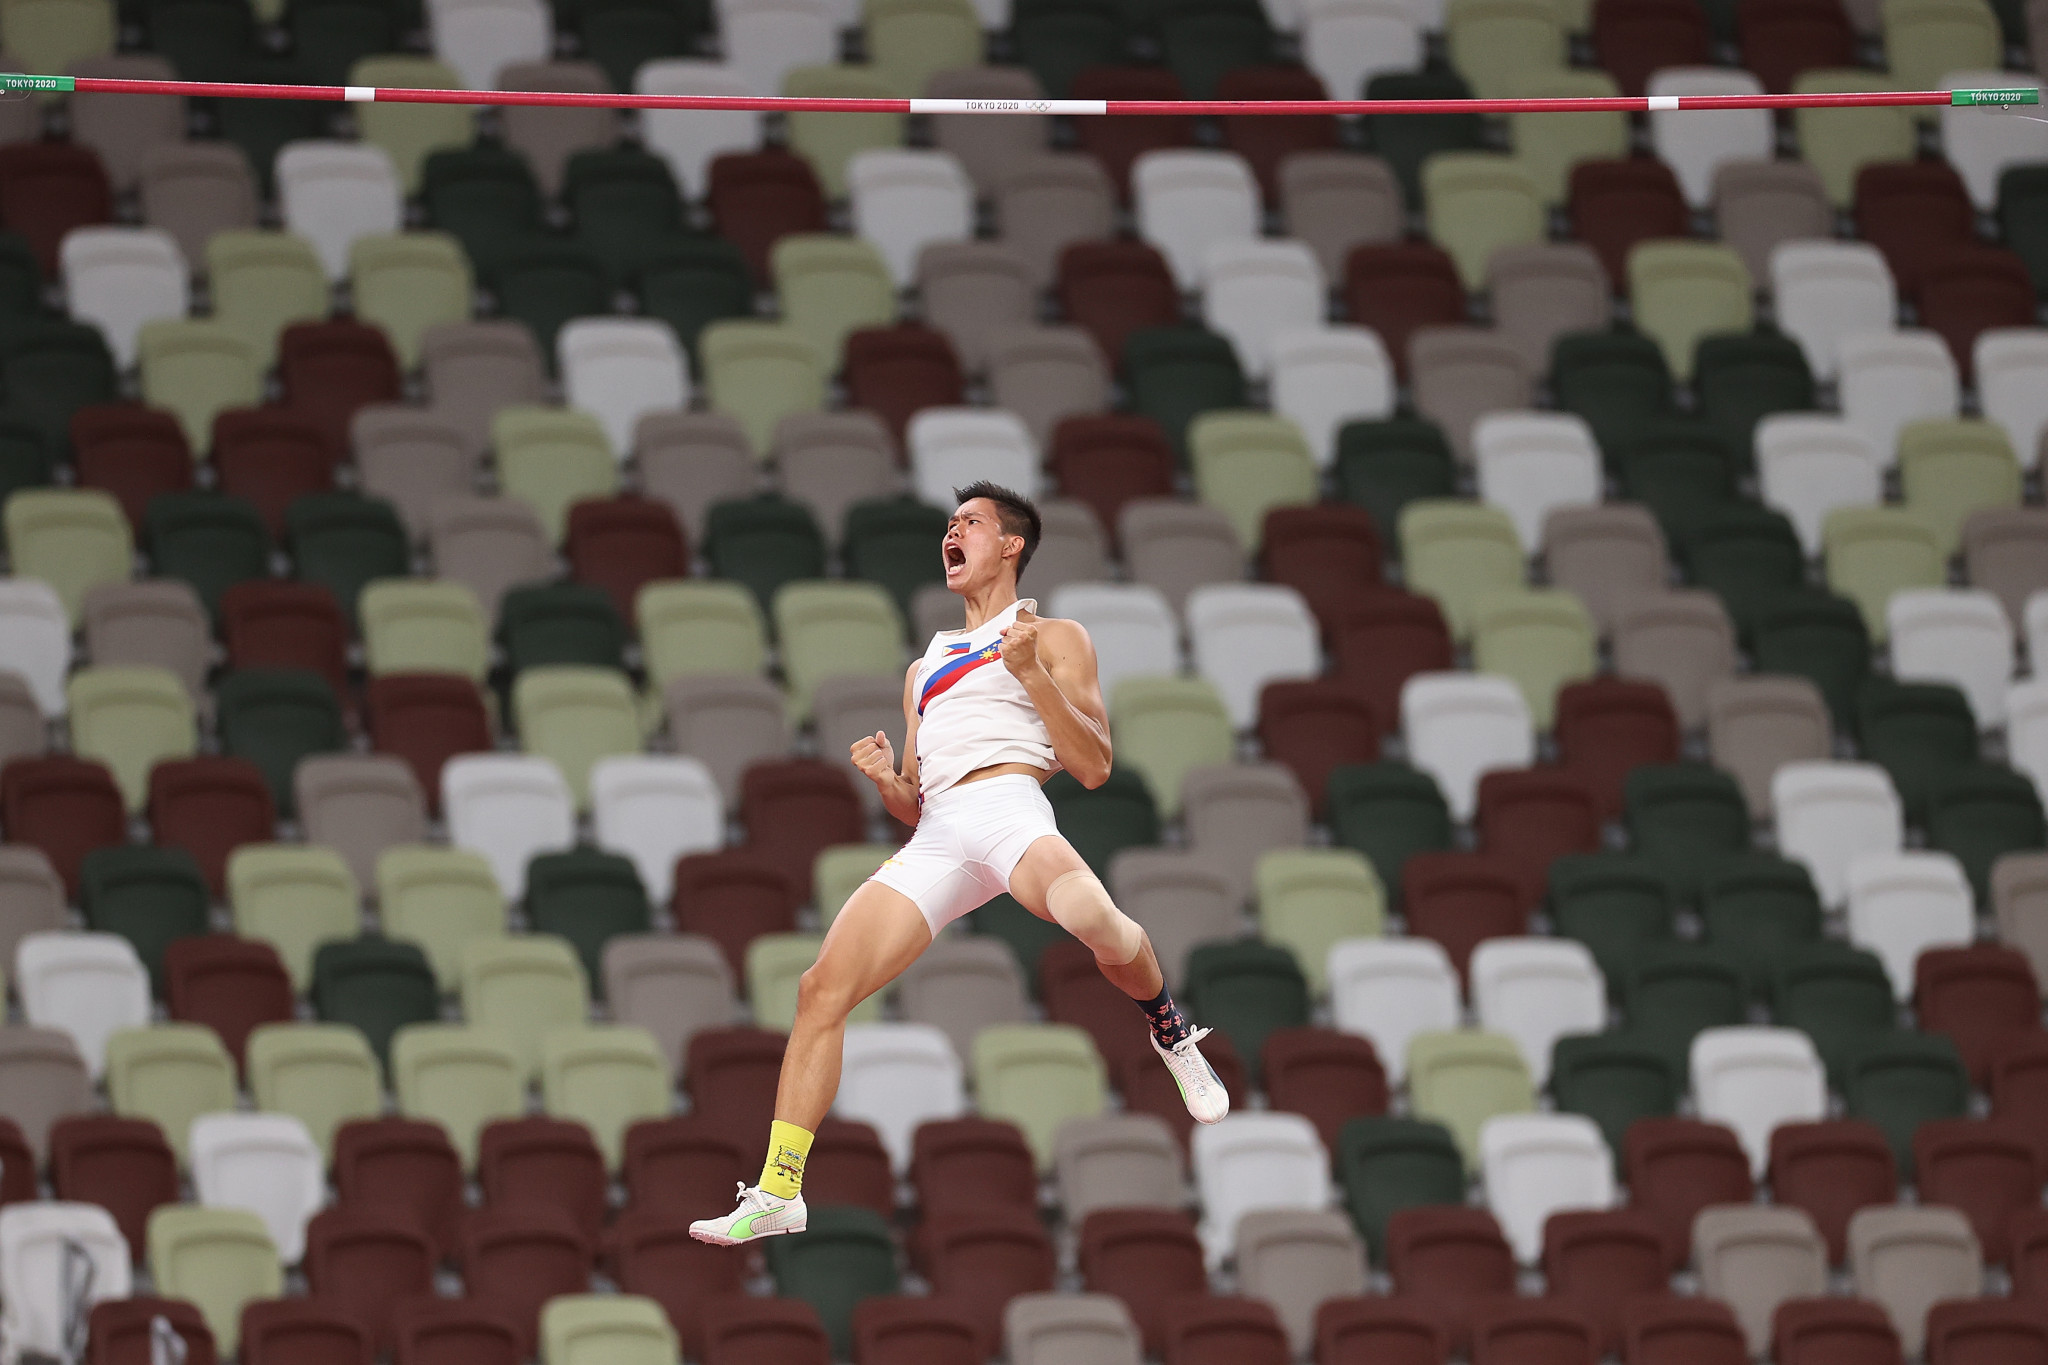 World number two pole vaulter Ernest Obiena is due to serve as one of the Philippines' flagbearers for Hangzhou 2022 alongside skateboarder Margielyn Didal ©Getty Images